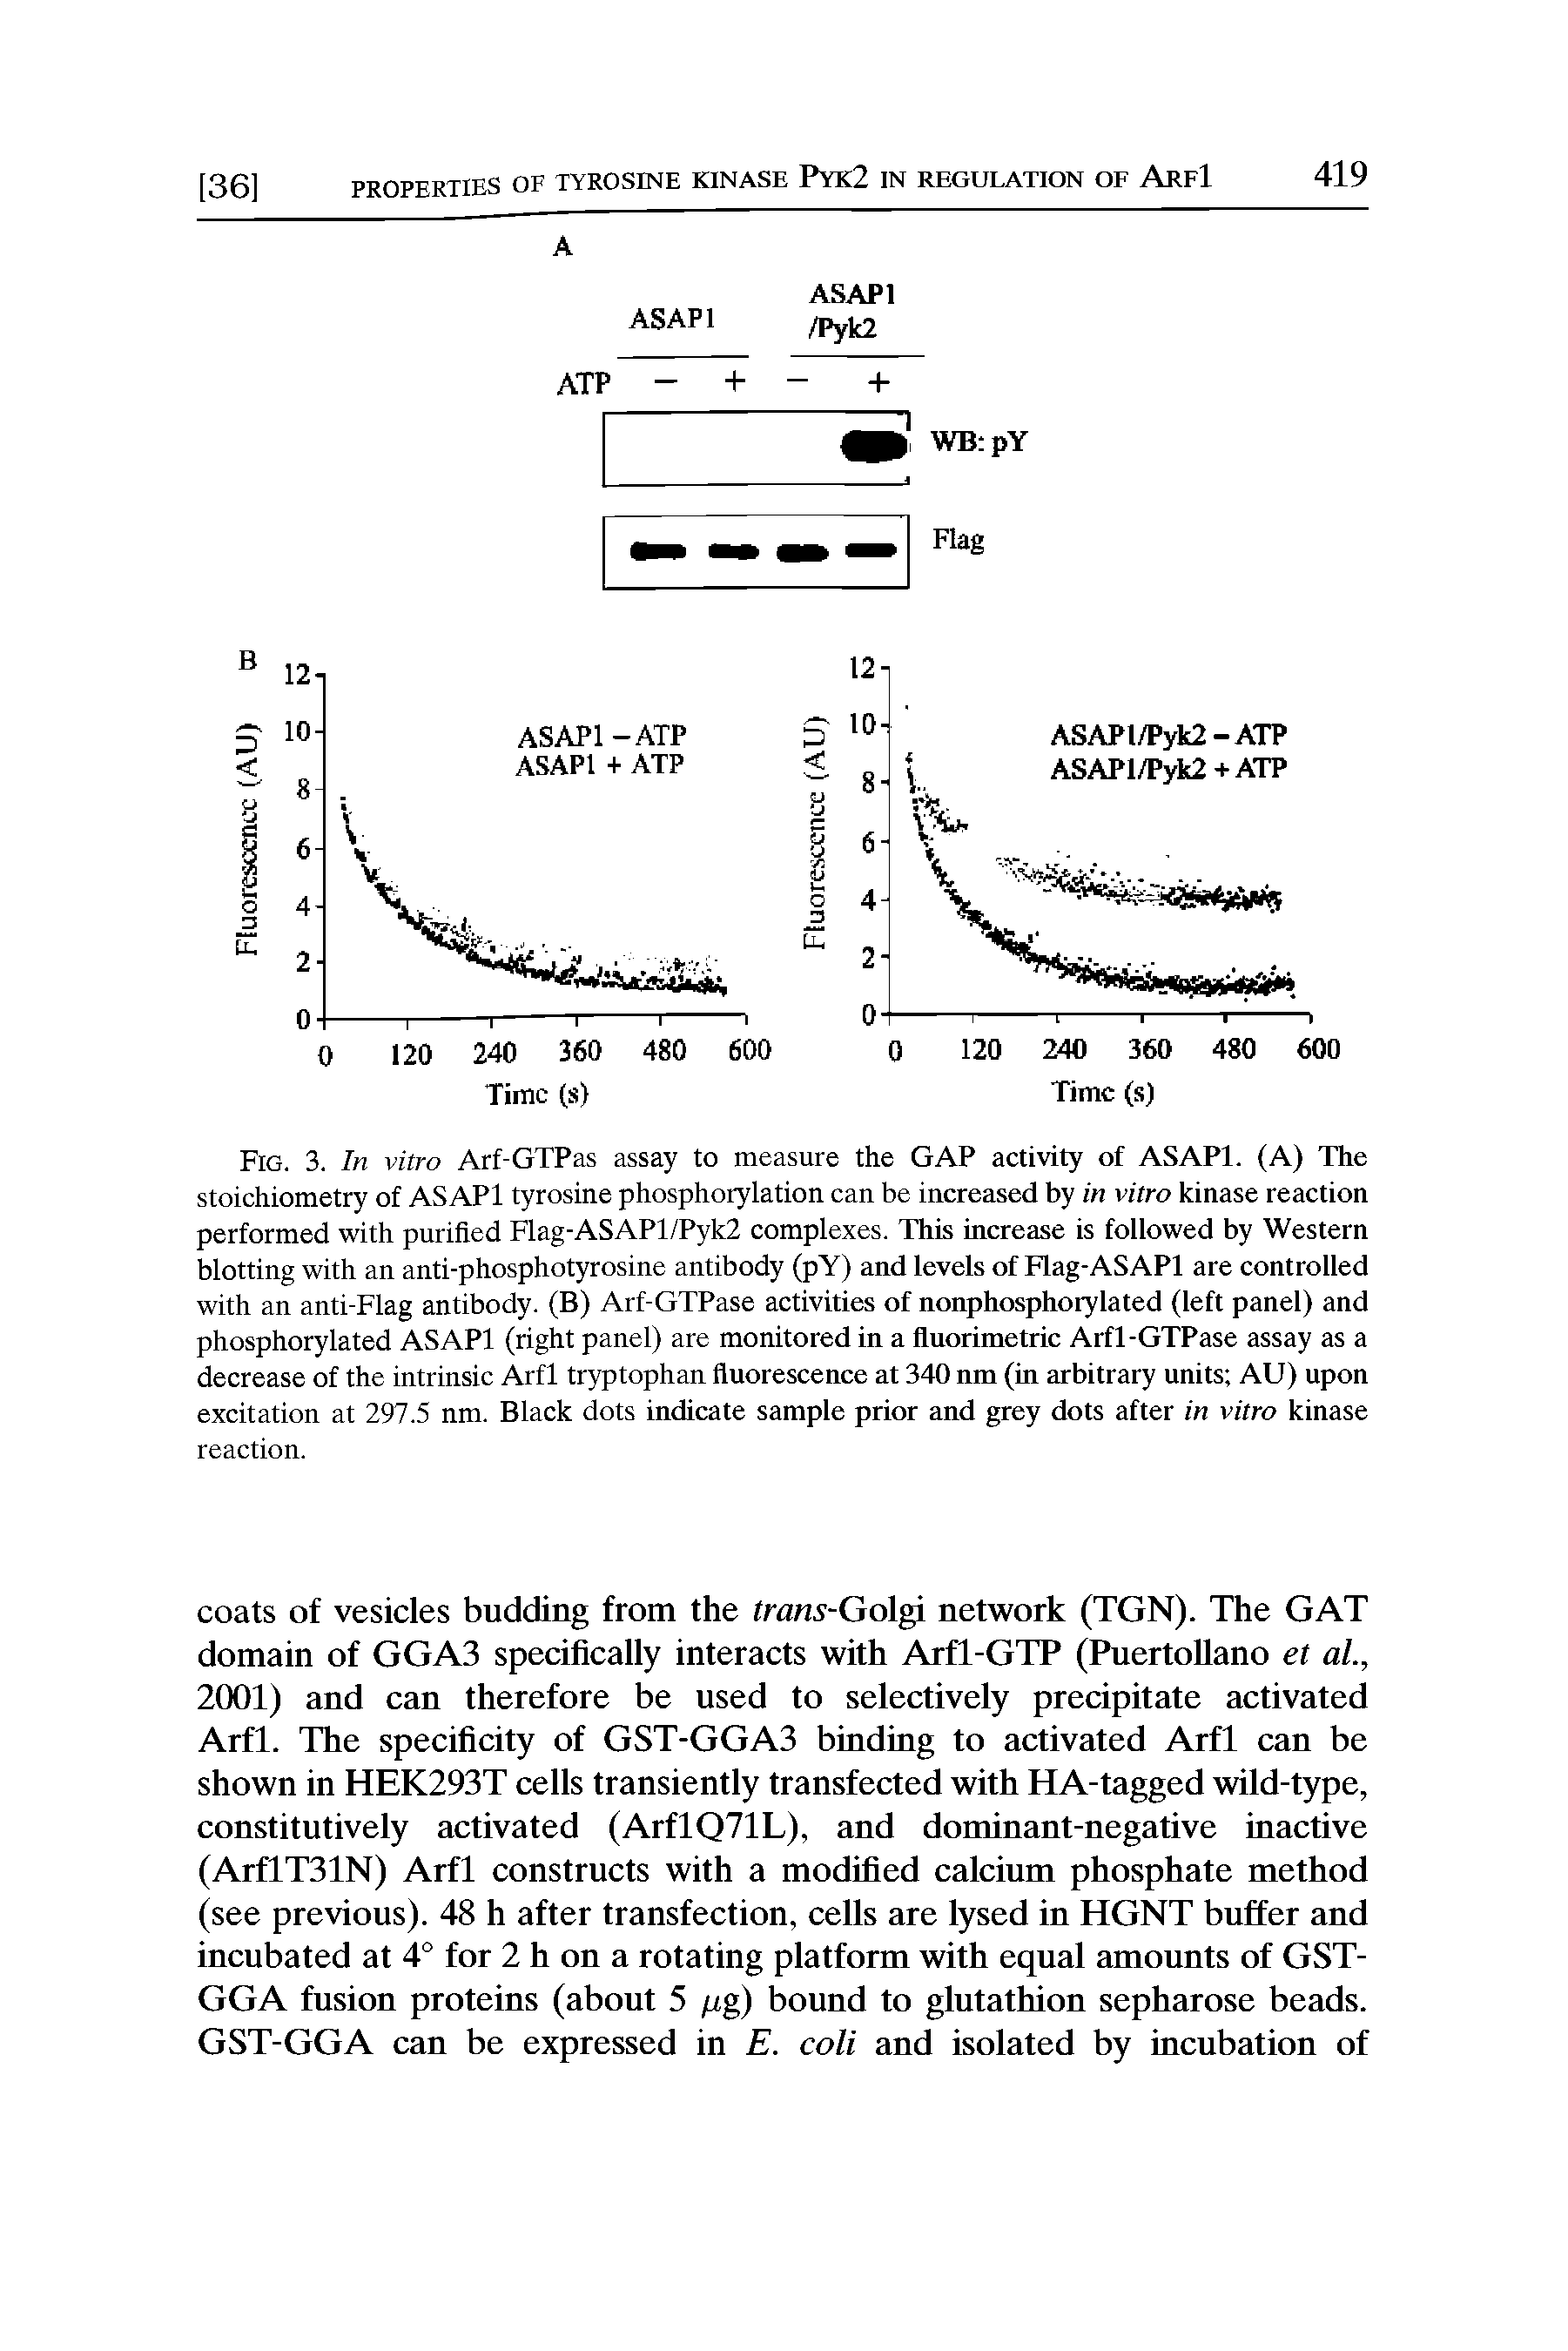 Fig. 3. In vitro Arf-GTPas assay to measure the GAP activity of ASAPl. (A) The stoichiometry of ASAPl tyrosine phosphorylation can be increased by in vitro kinase reaction performed with purified Flag-ASAP1/Pyk2 complexes. This increase is followed by Western blotting with an anti-phosphotyrosine antibody (pY) and levels of Hag-ASAPl are controlled with an anti-Flag antibody. (B) Arf-GTPase activities of nonphosphorylated (left panel) and phosphorylated ASAPl (right panel) are monitored in a fluorimetric Arfl-GTPase assay as a decrease of the intrinsic Arfl tryptophan fluorescence at 340 nm (in arbitrary units AU) upon excitation at 297.5 nm. Black dots indicate sample prior and grey dots after in vitro kinase reaction.